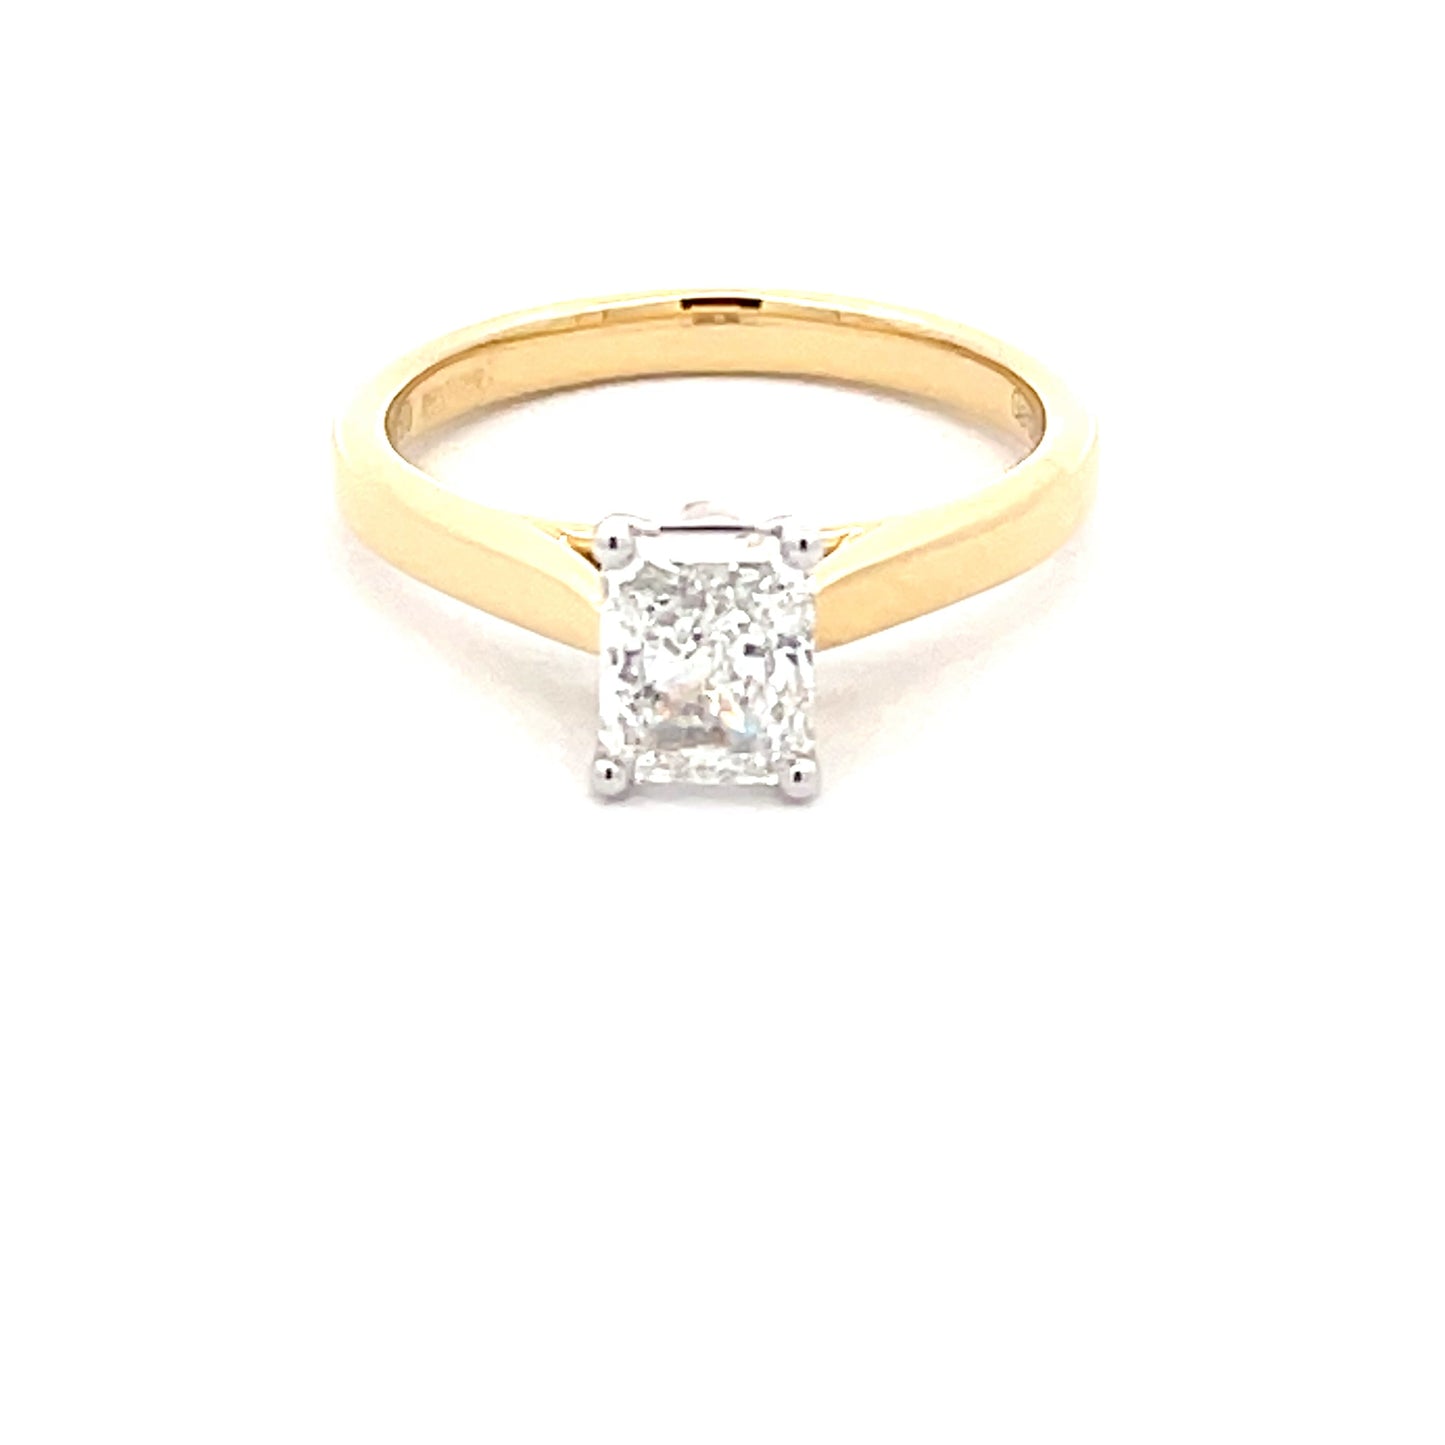 Radiant Cut Diamond Solitaire Ring - 1.00cts  Gardiner Brothers   